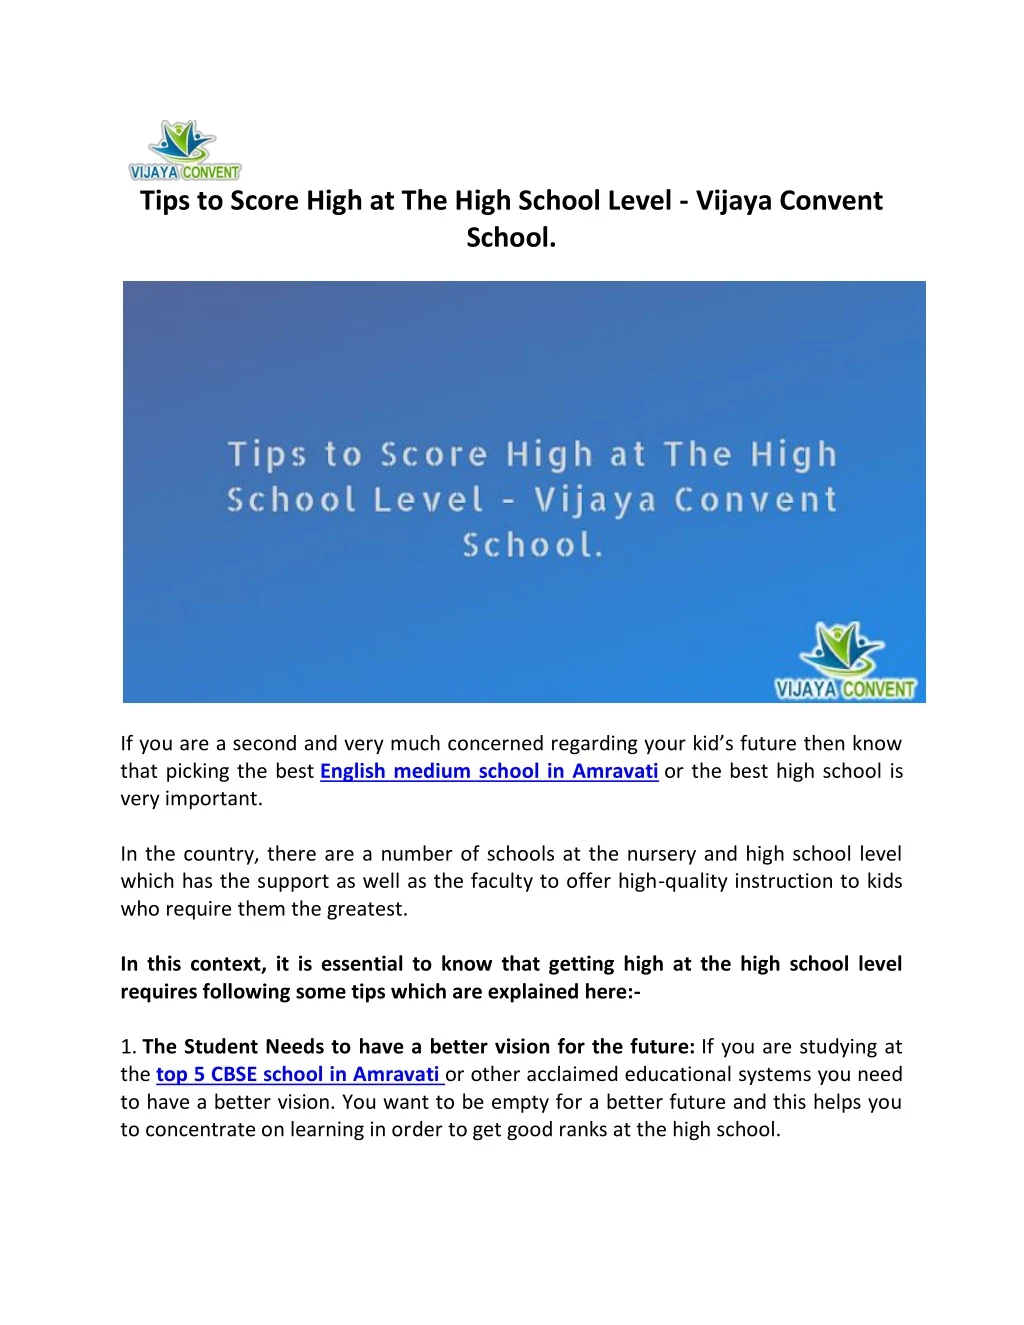 tips to score high at the high school level